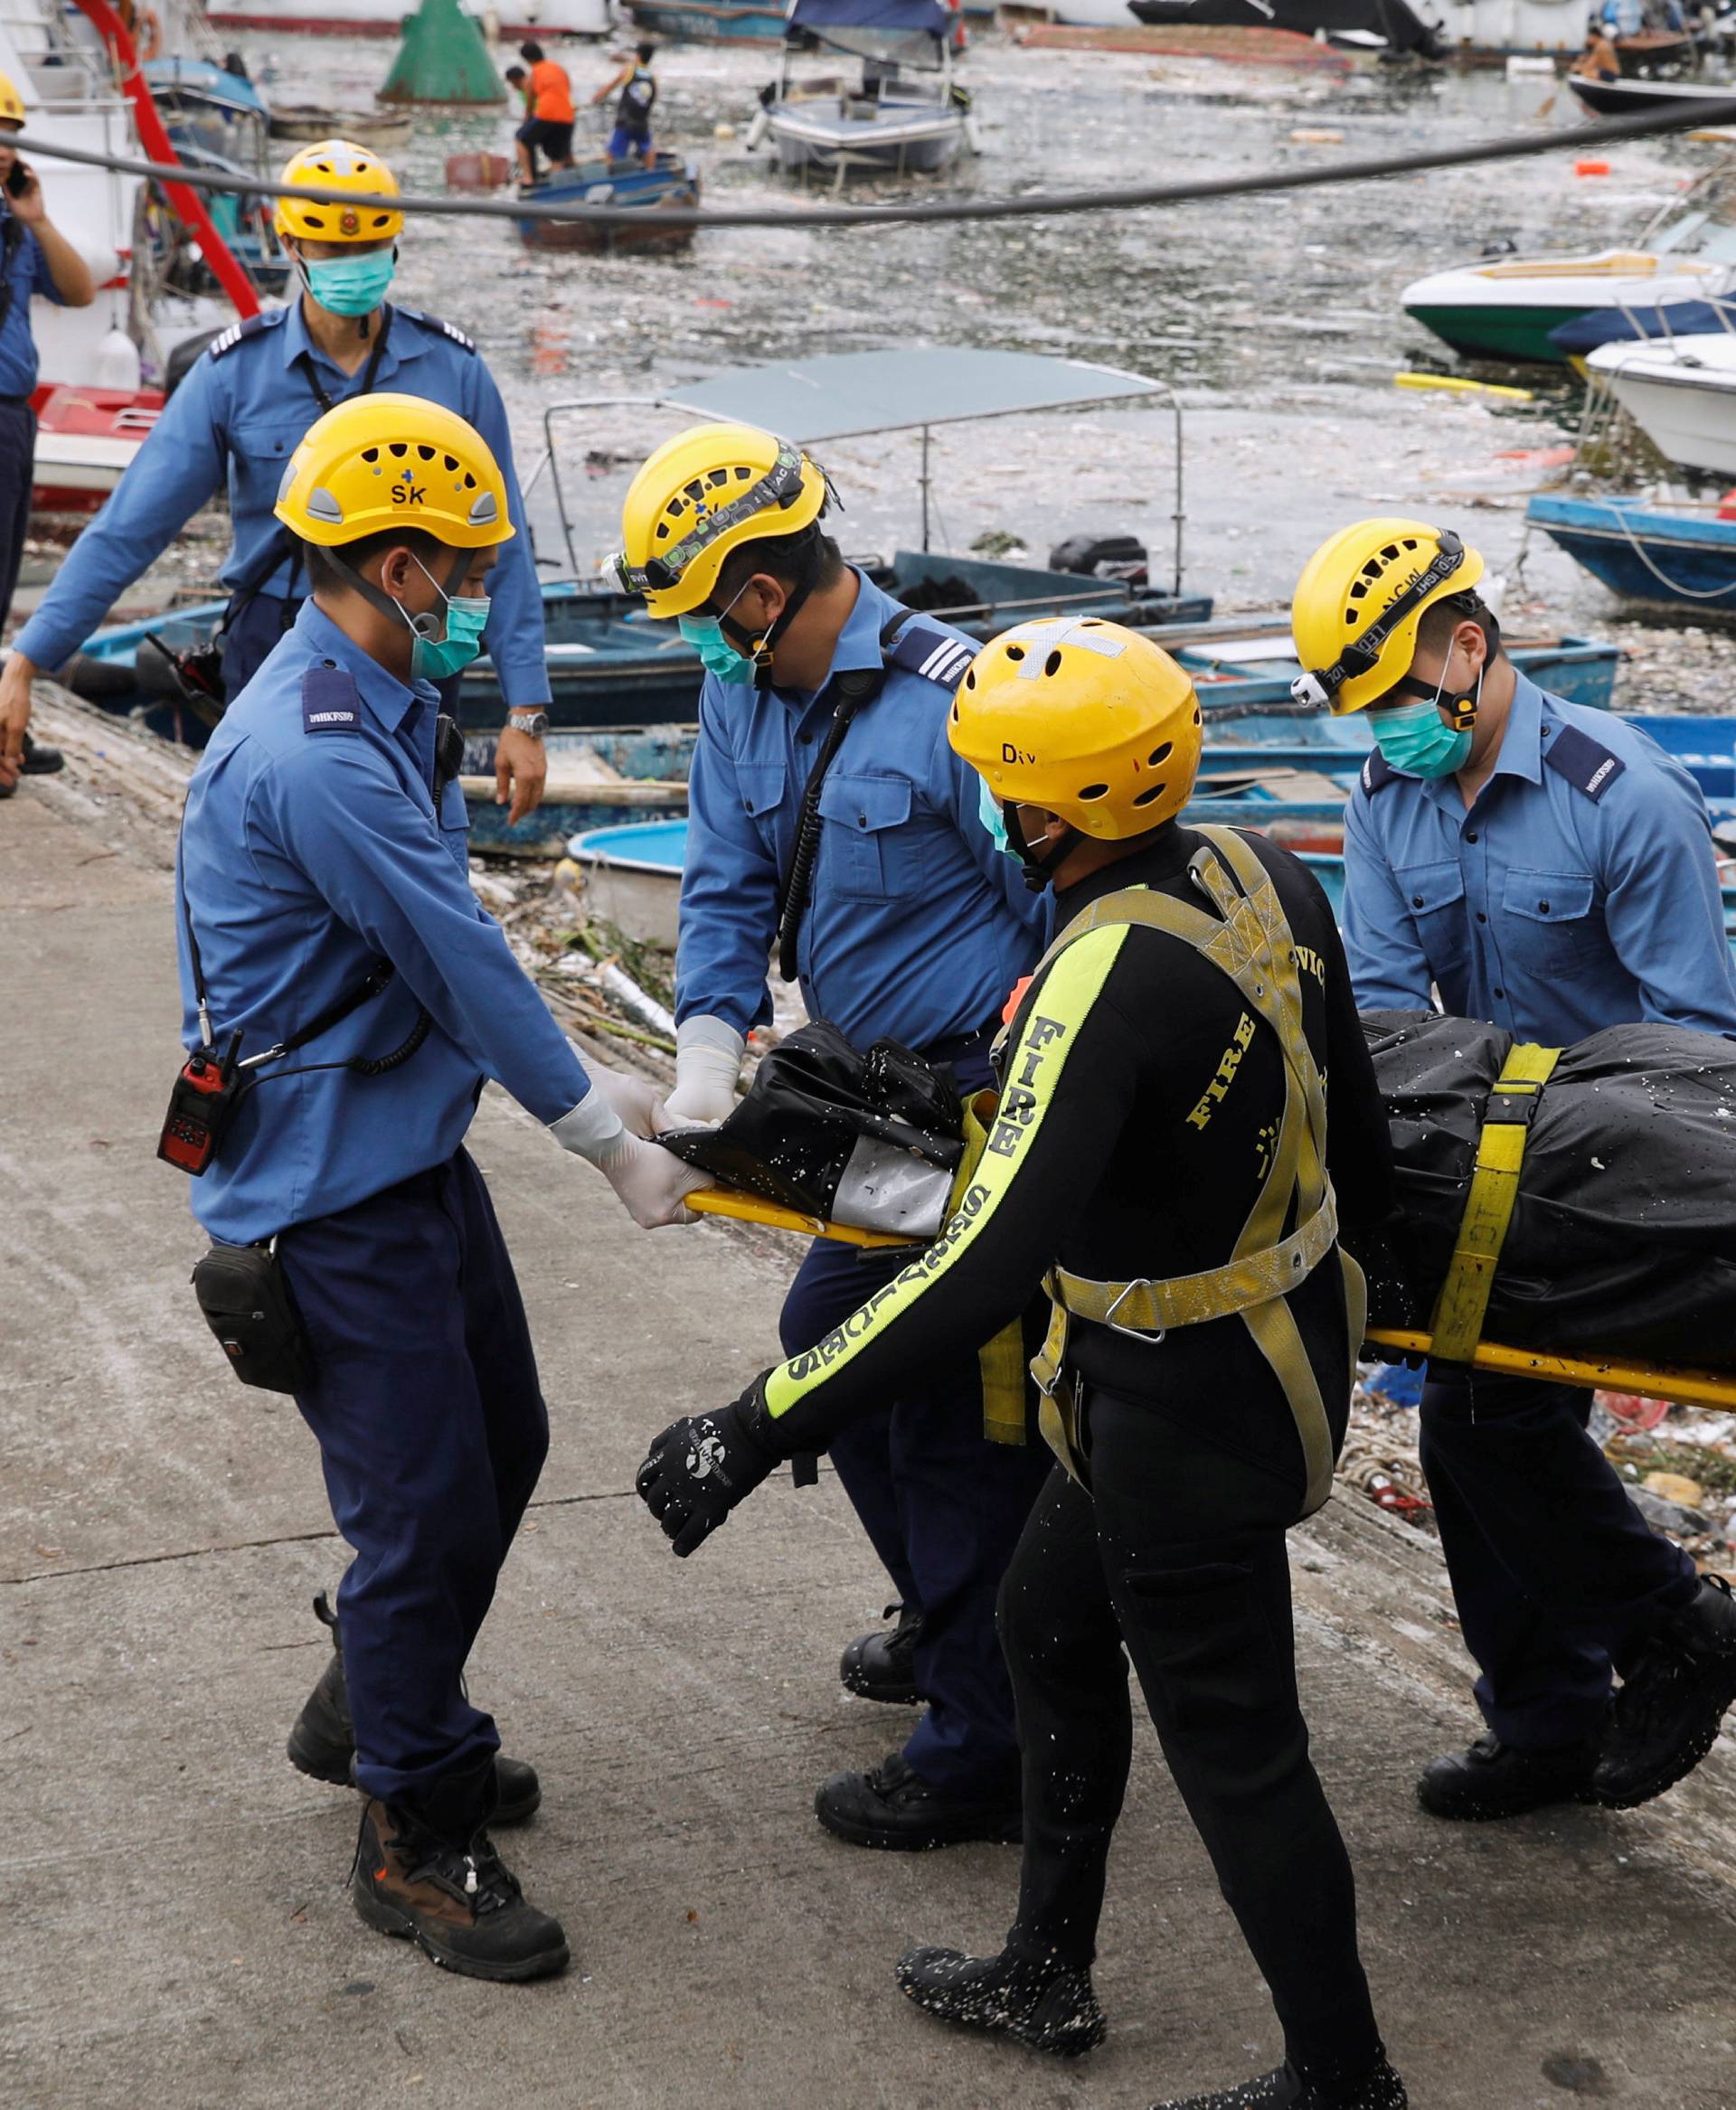 Firemen carry a covered body near the Sai Kung Hoi Pong Street waterfront after Super Typhoon Mangkhut hit Hong Kong